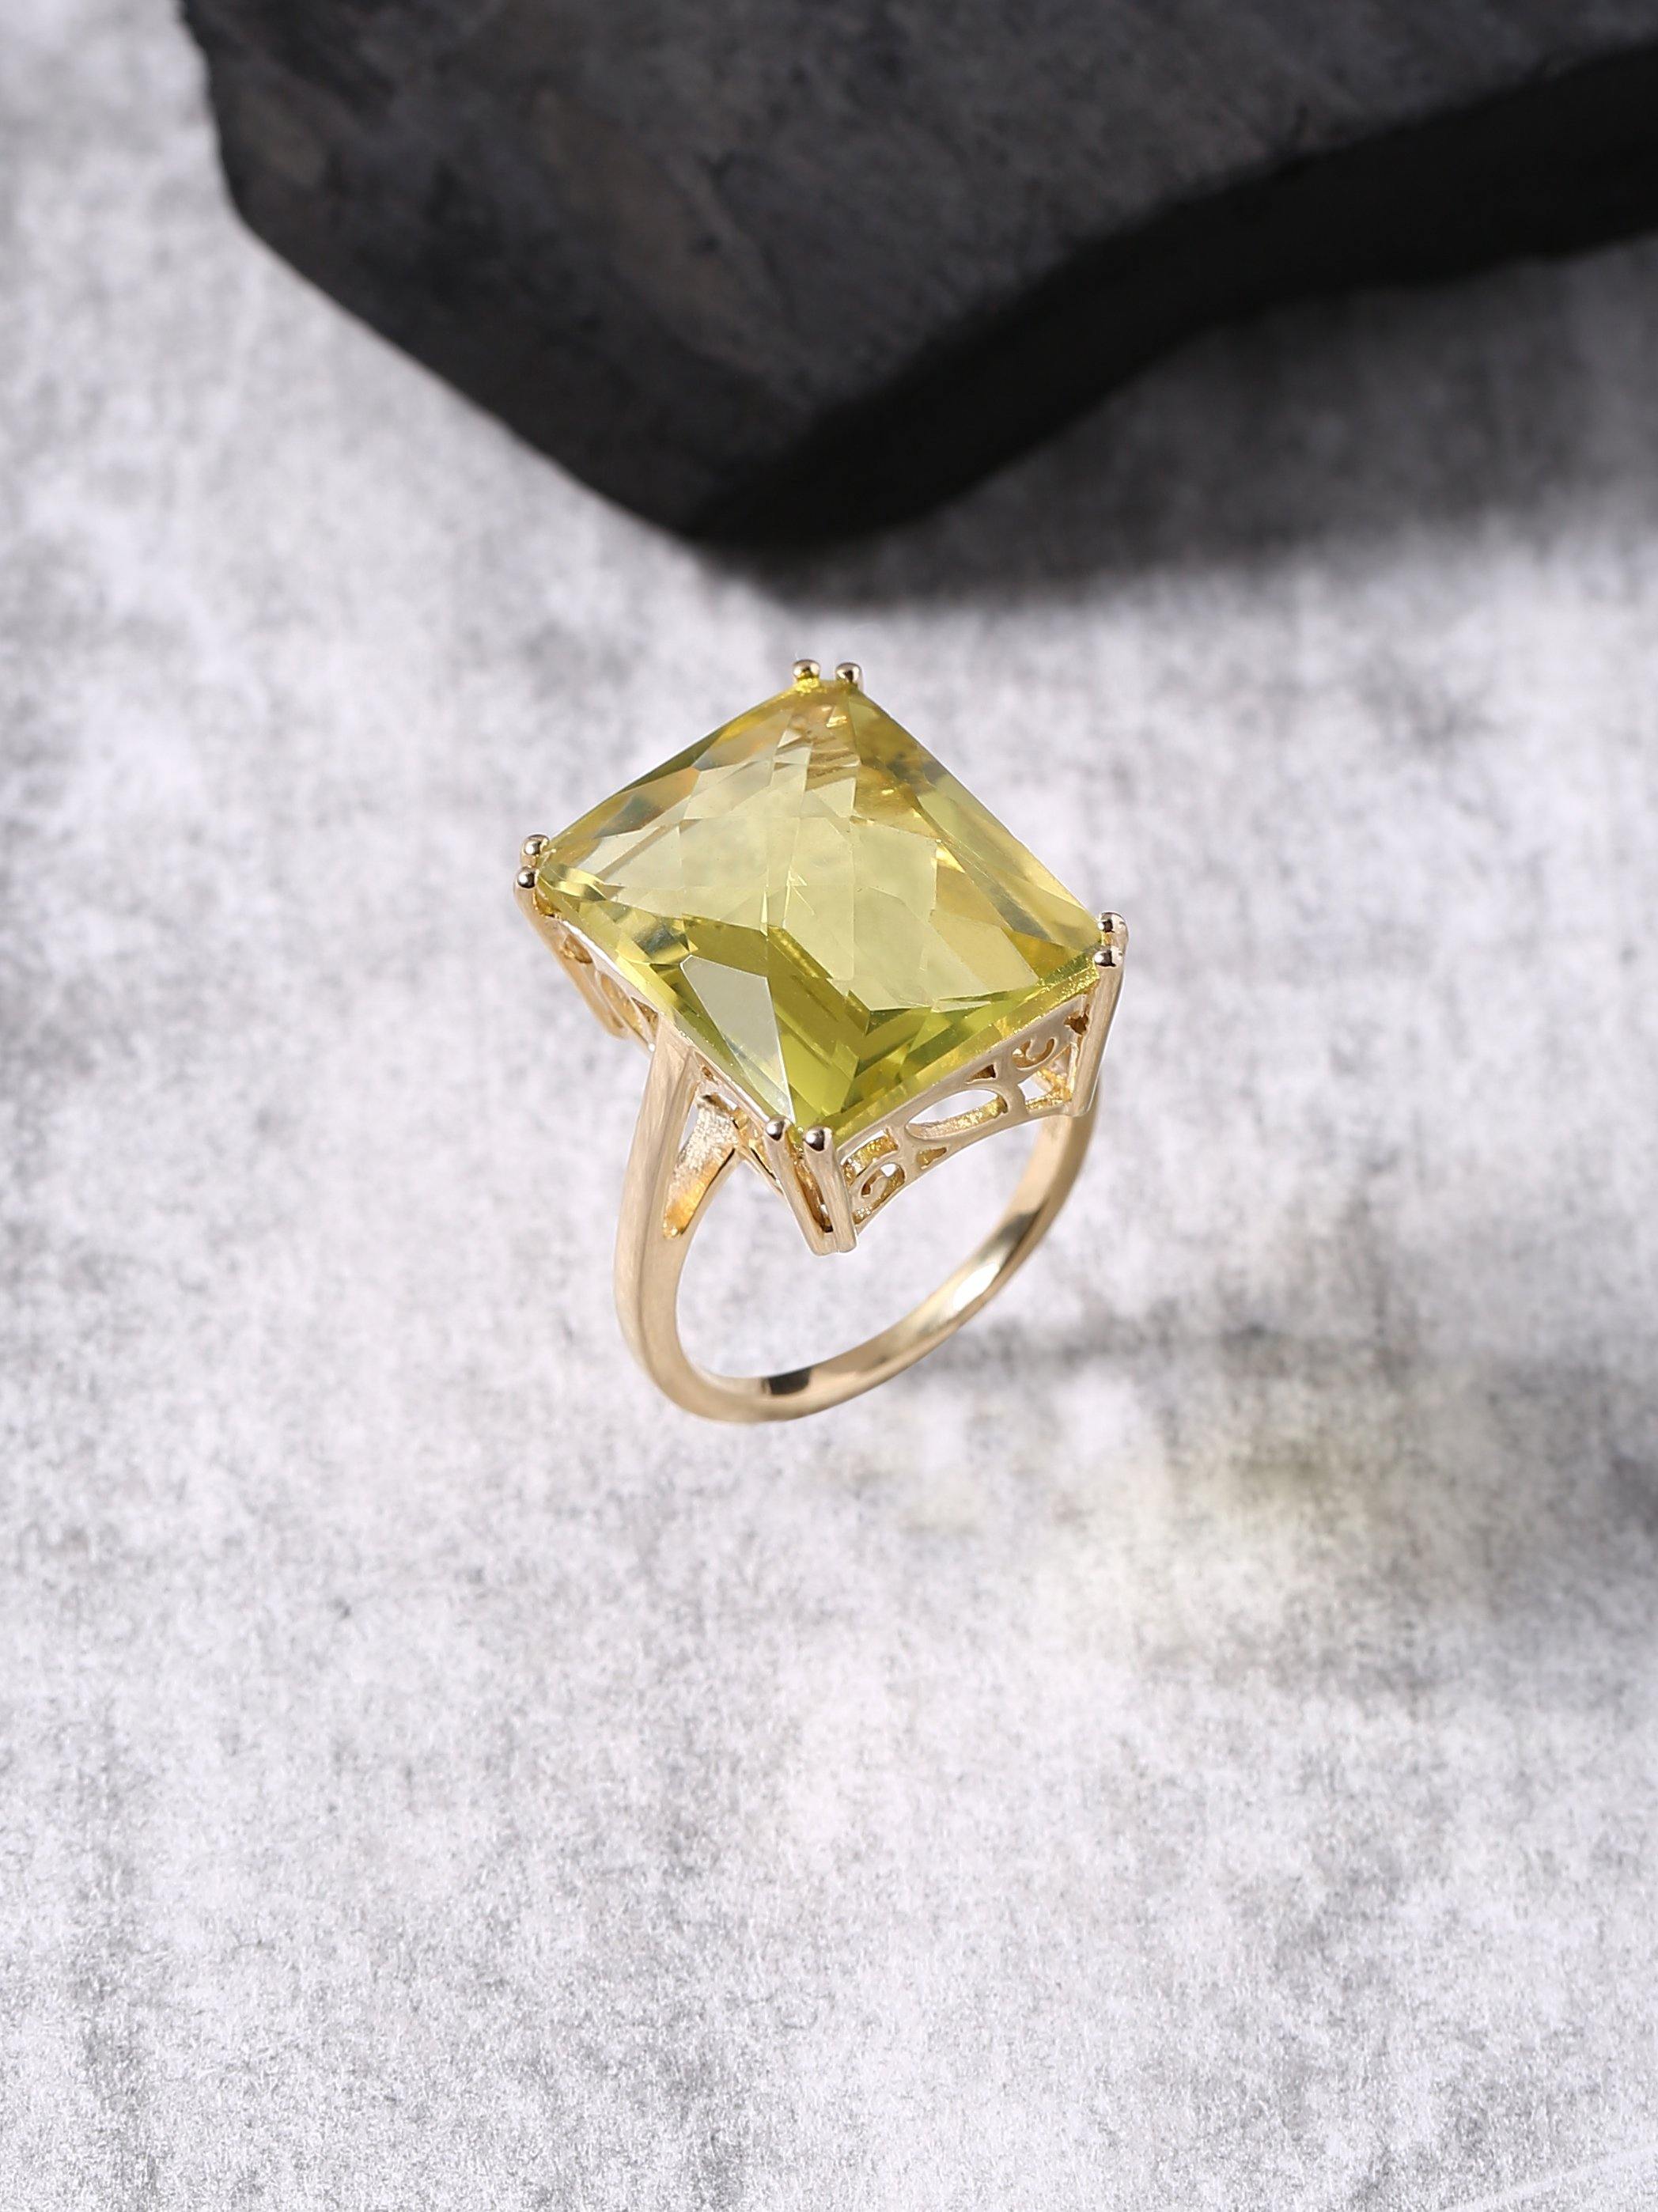 Green Gold Quartz Solid 925 Sterling Silver Gold Plated Statement Ring Jewelry - YoTreasure